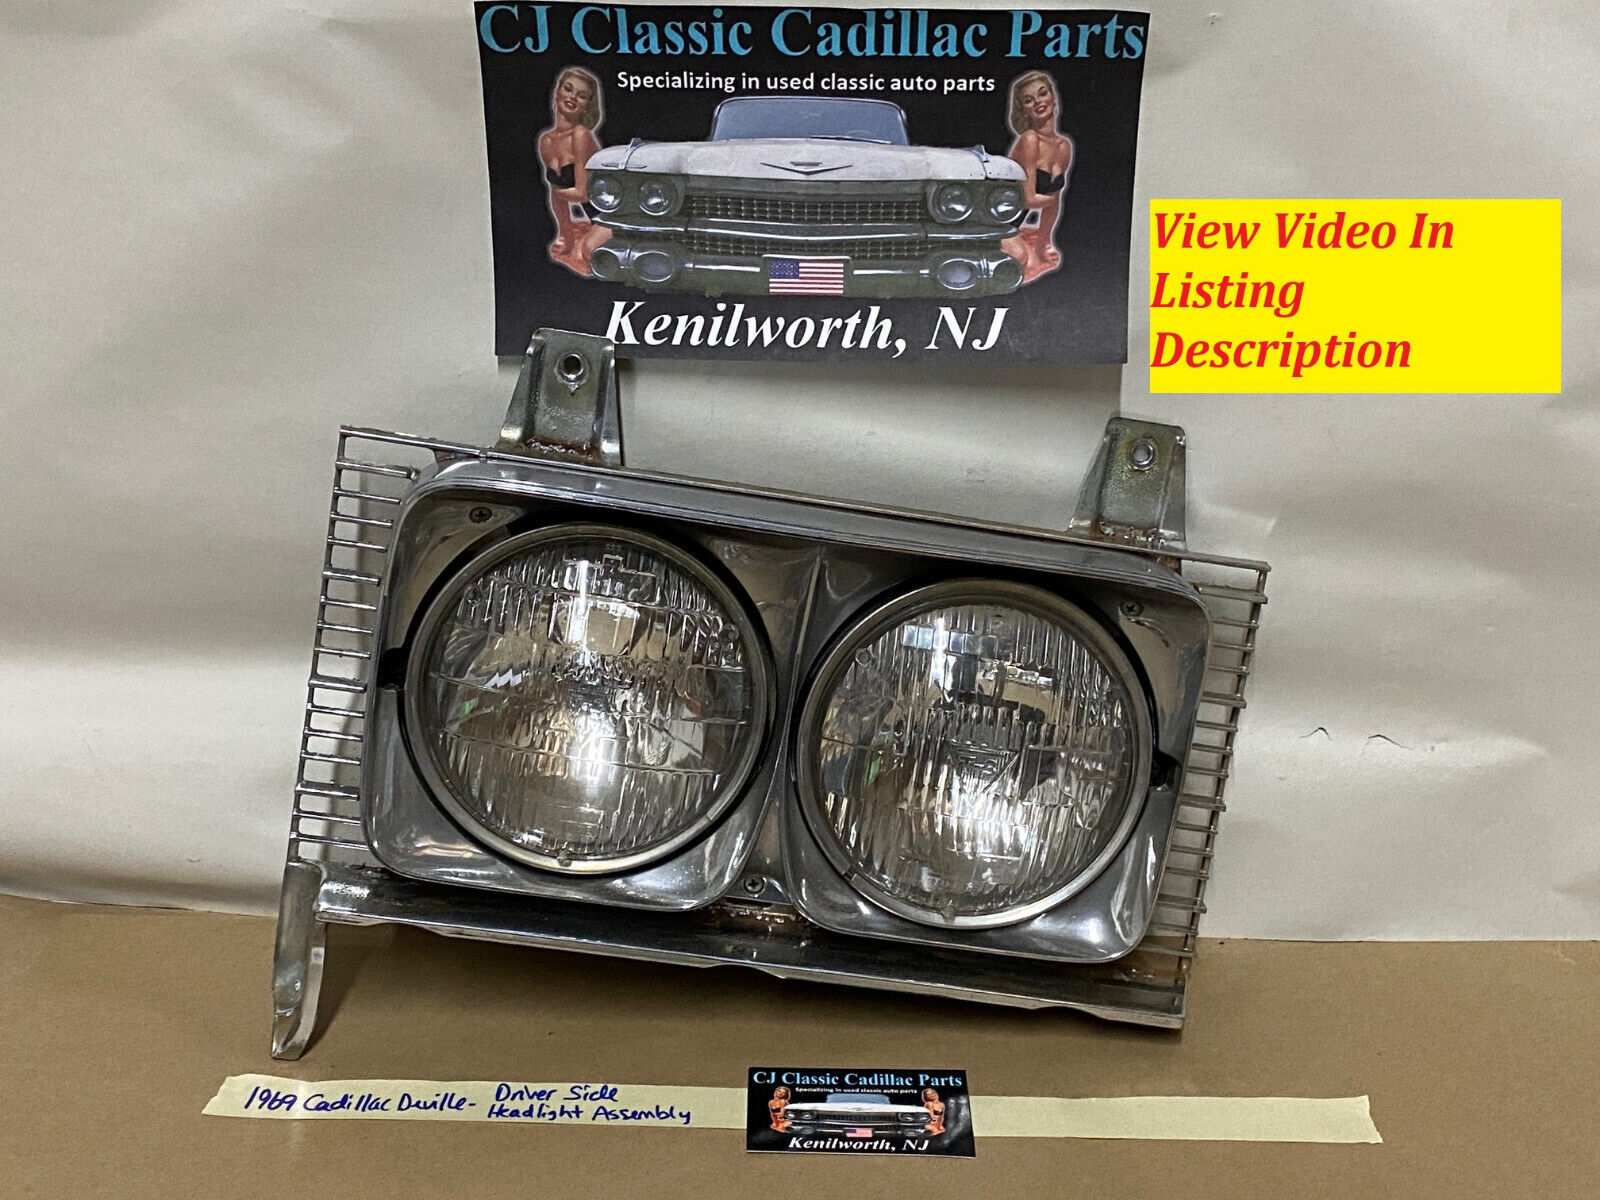 Primary image for 69 Cadillac Deville LEFT DRIVER SIDE HEADLIGHT ASSEMBLY GRILL HOUSING BUCKETS